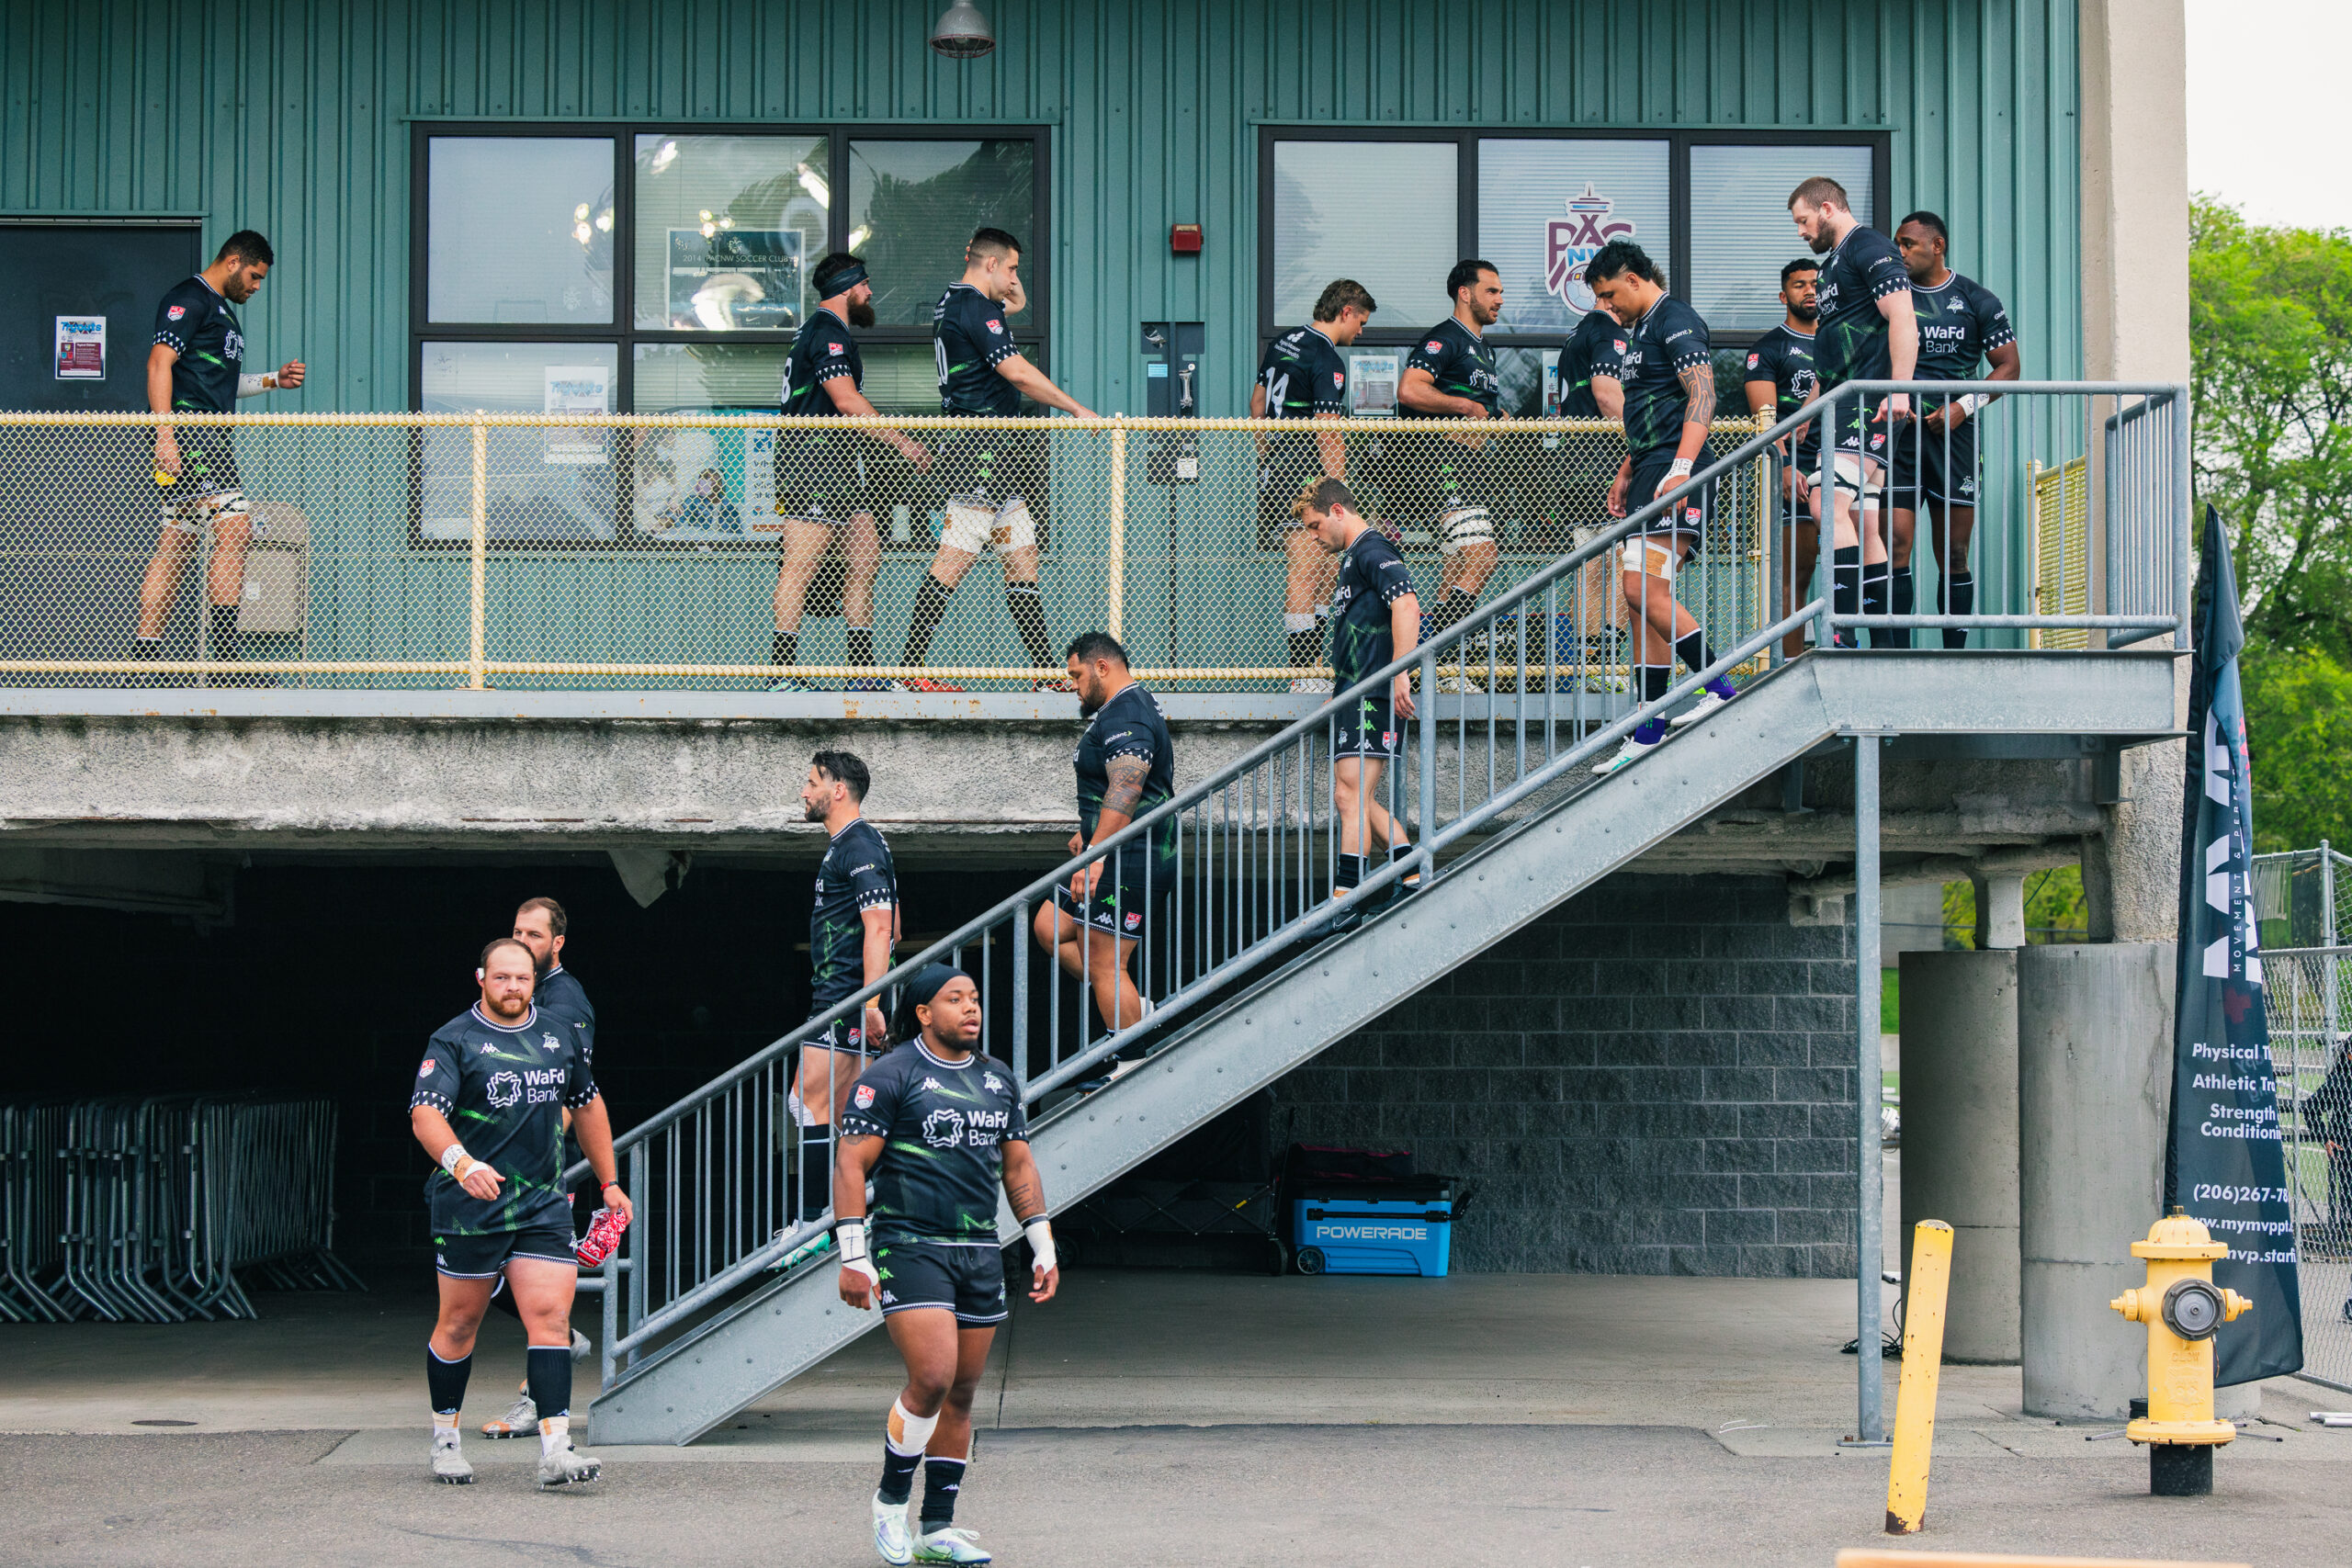 the seawolves players are leaving their changing room and walking down stairs